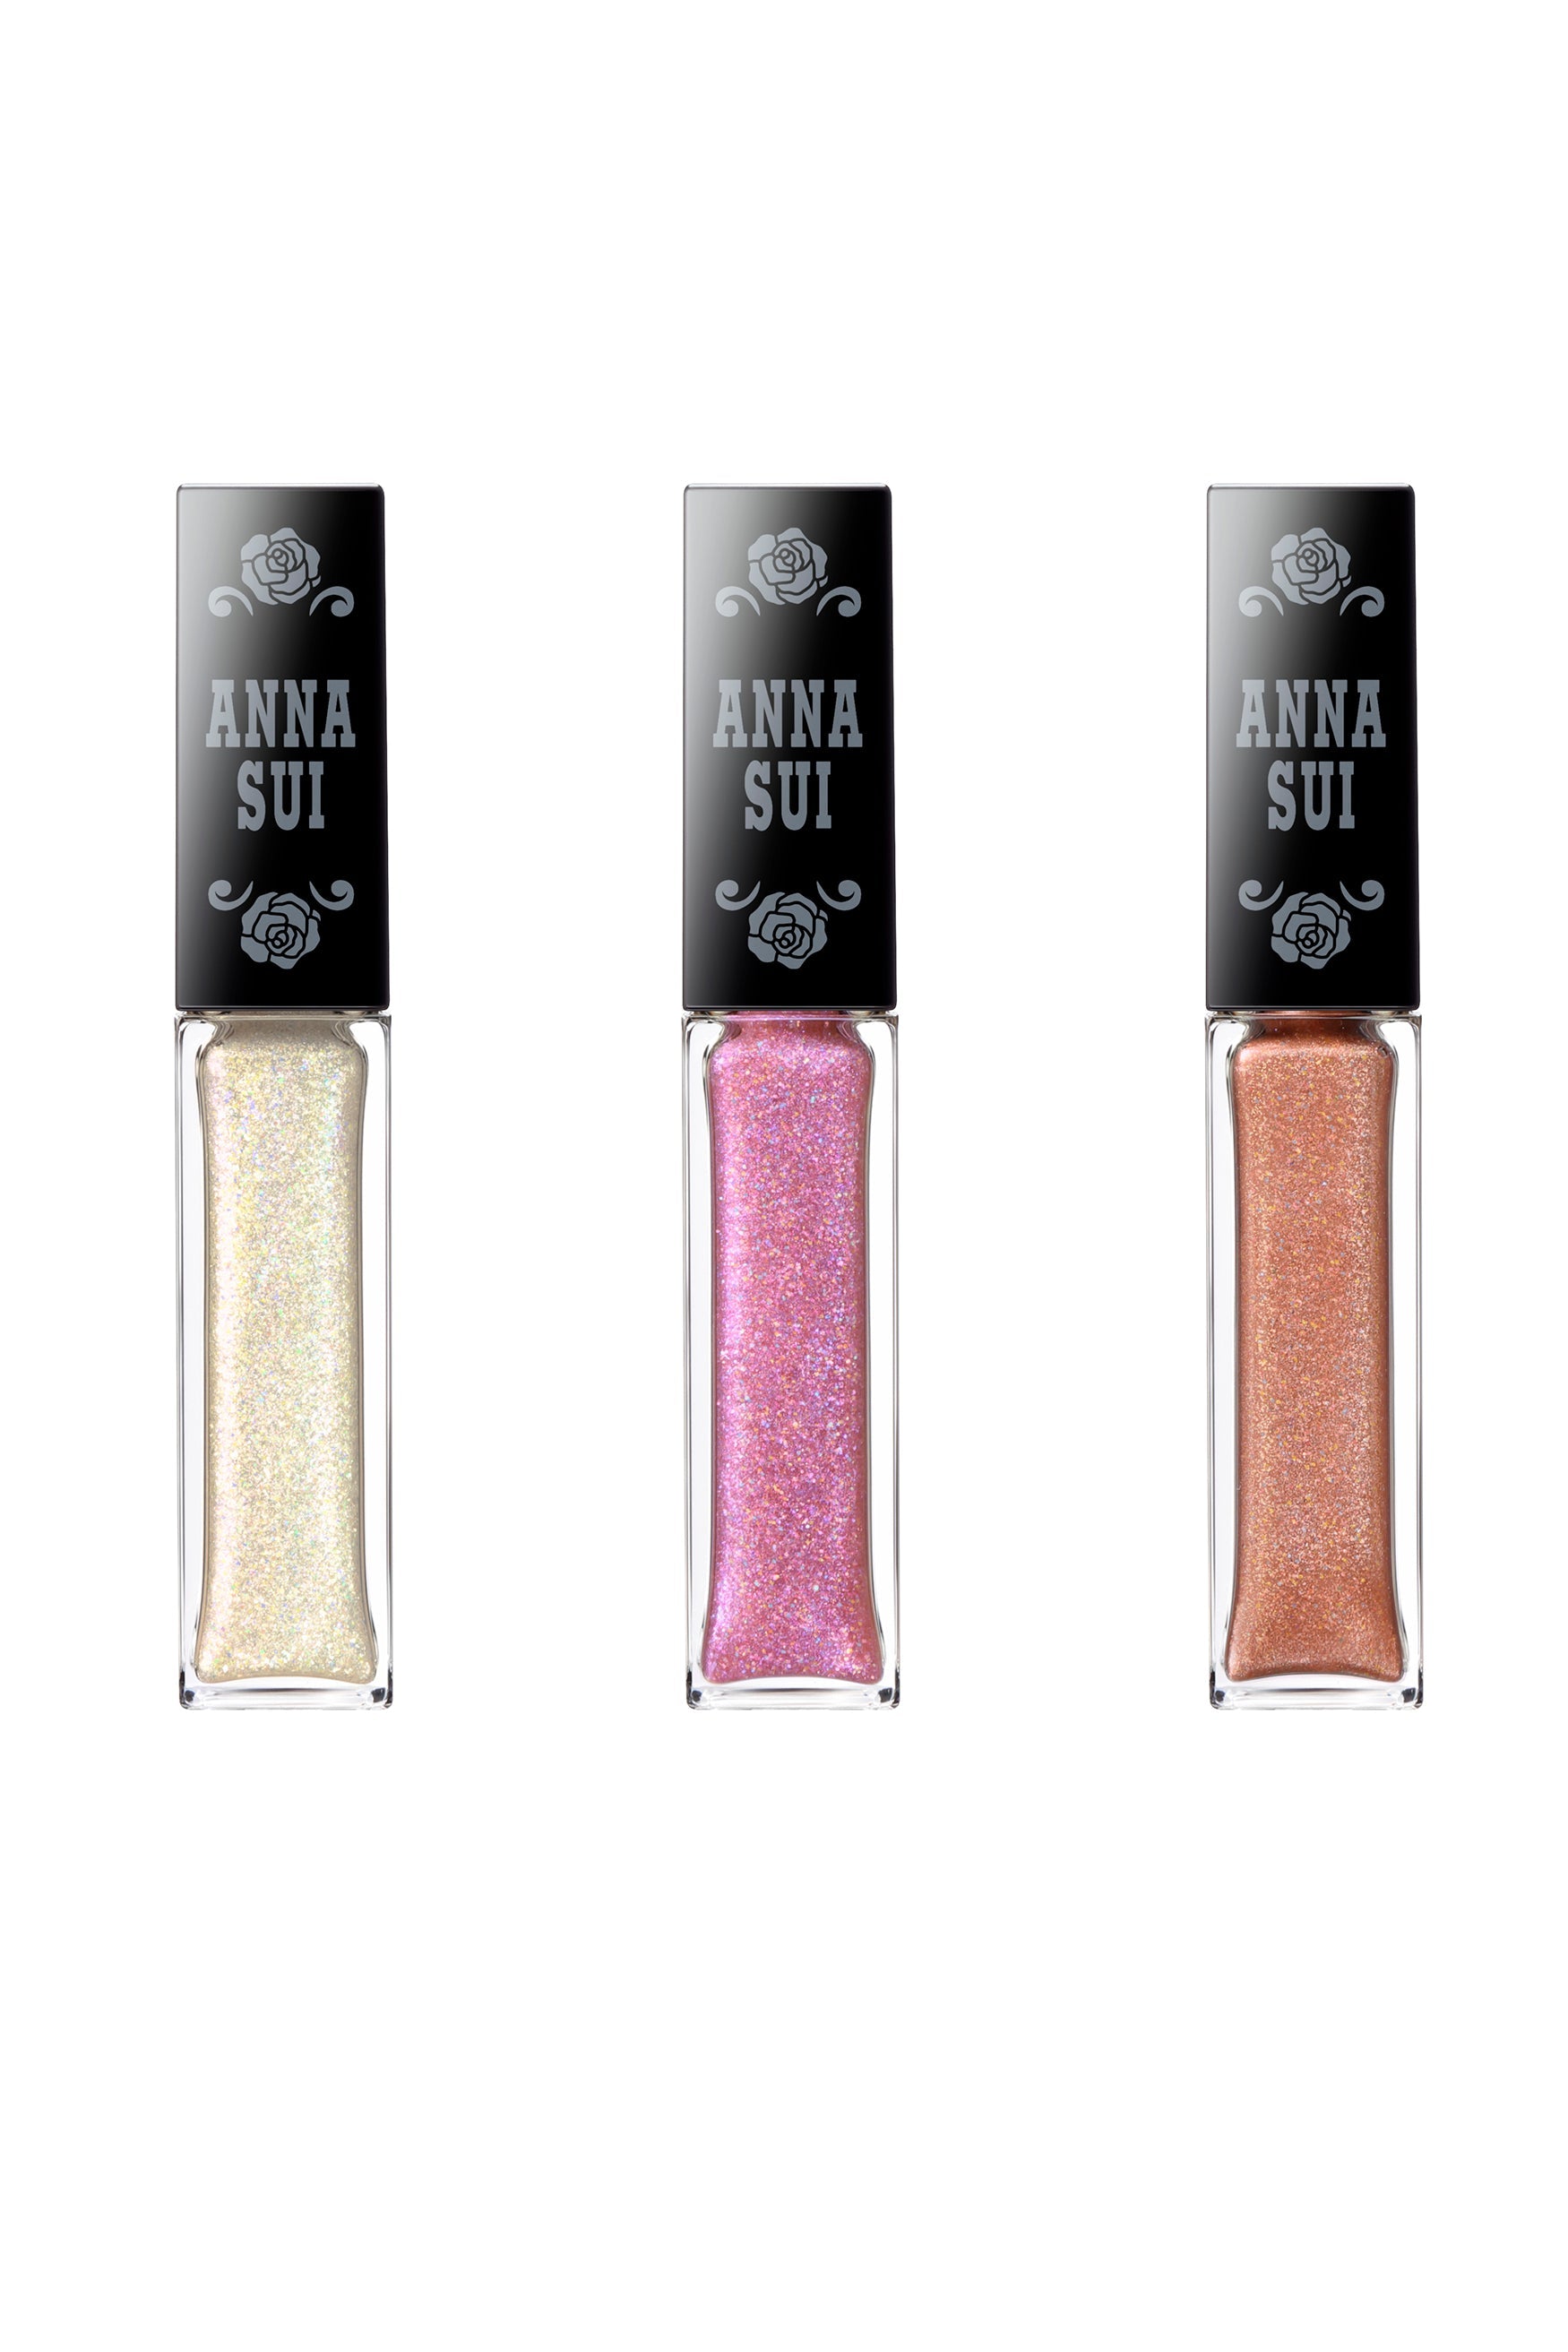 Pearlescent white, Pink parade, Honey glow are in a transparent bottle, white roses on the back cap, labeled with Anna Sui